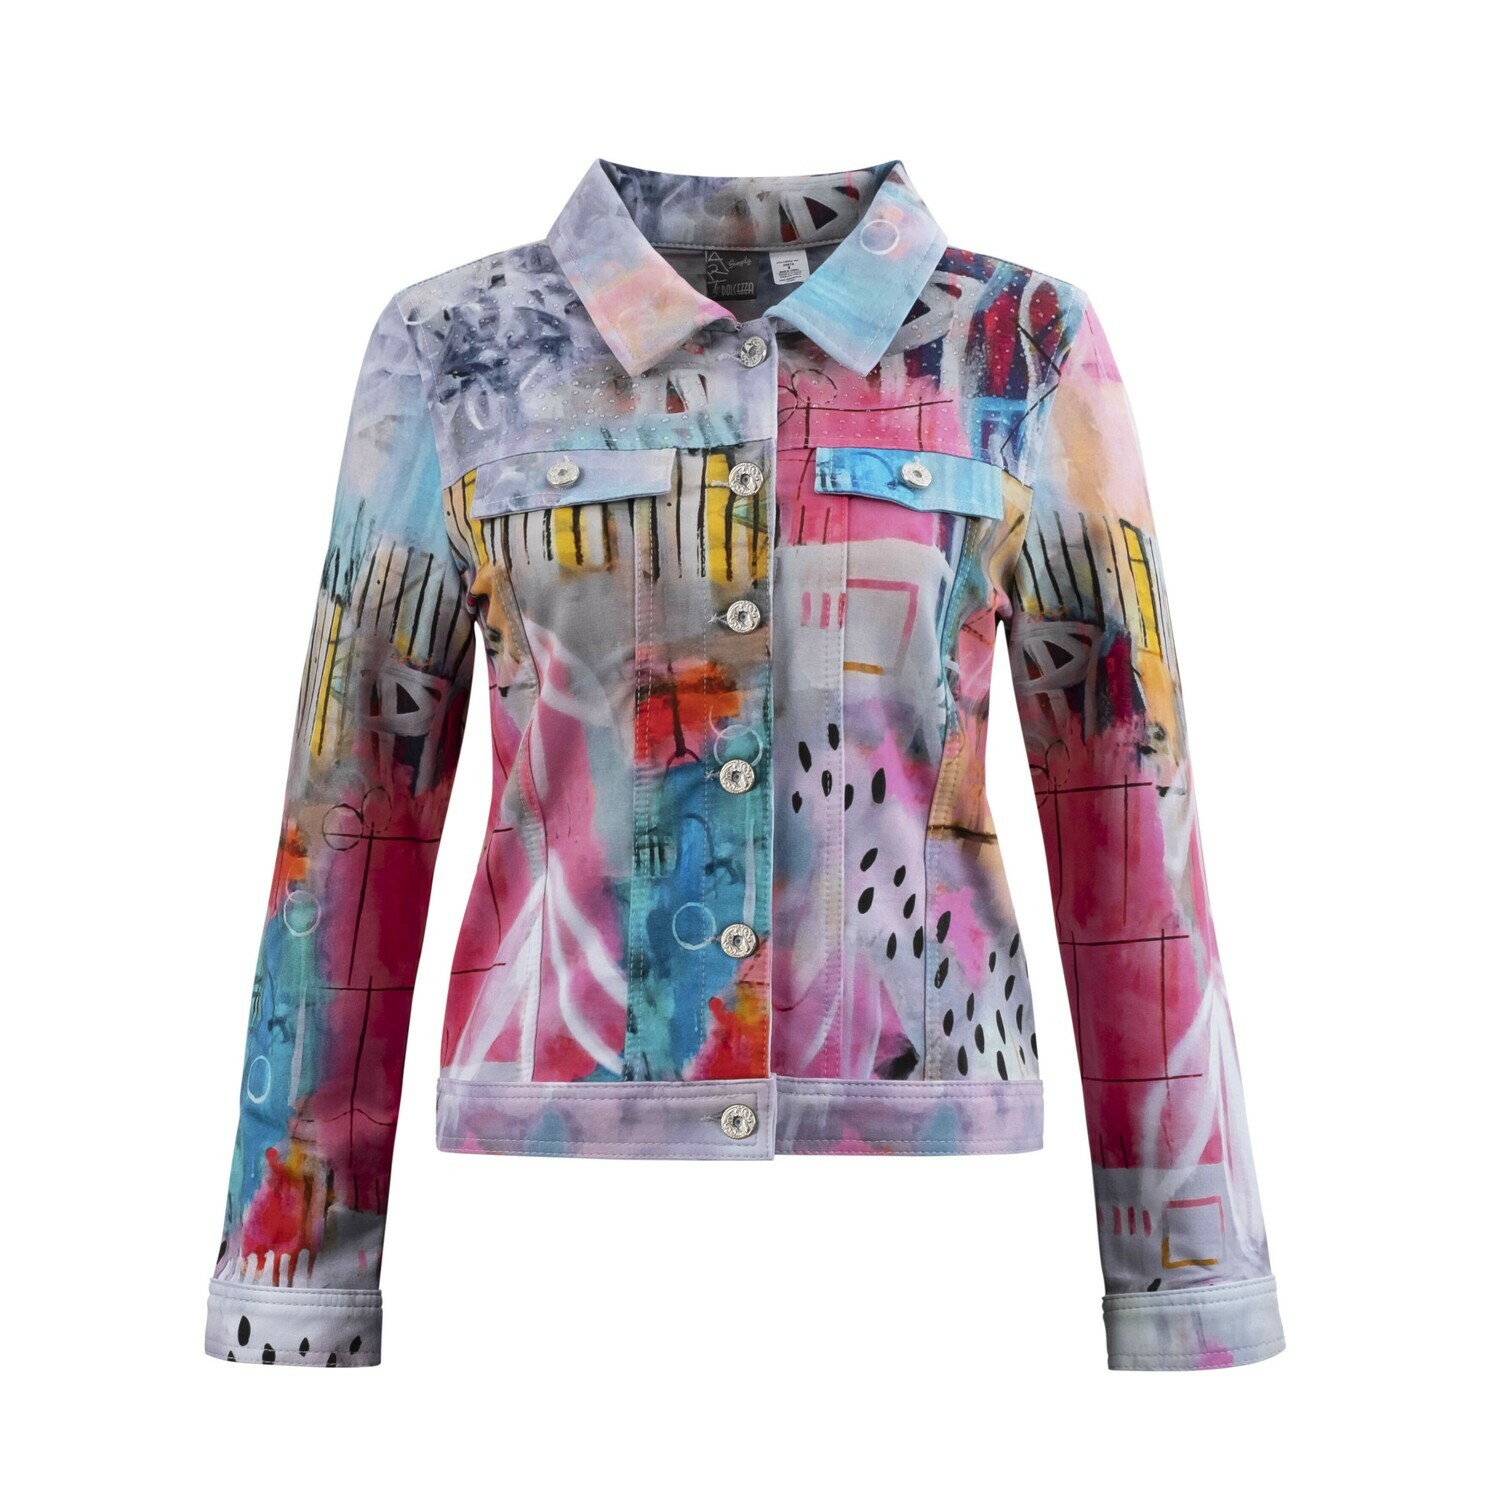 Simply Art Dolcezza: Receive The Best Things In Life Abstract Art Denim Jacket